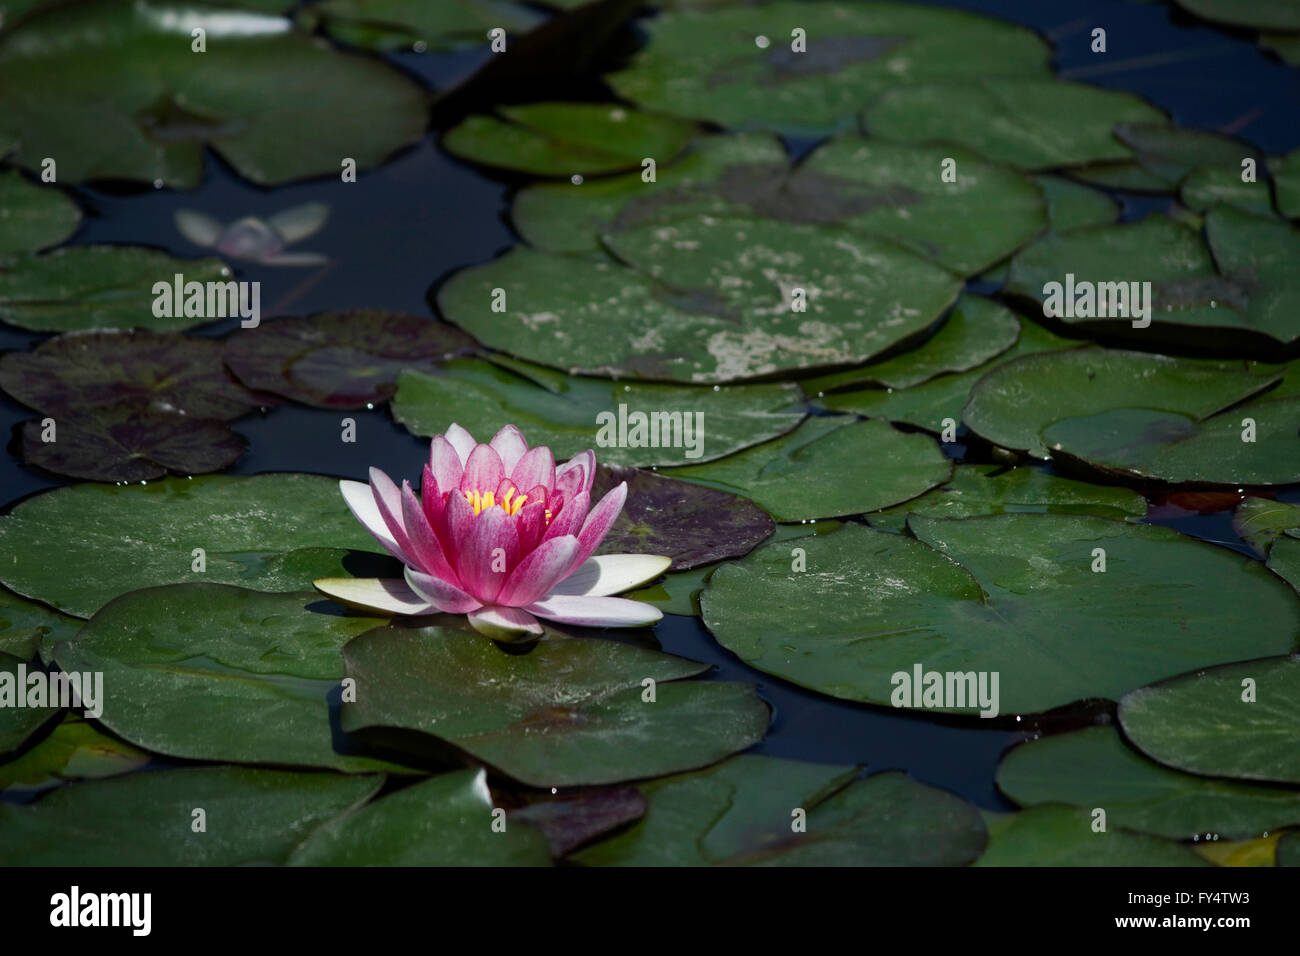 Violet waterlily (water lily) aquatic herb plant and green lily pads floating on water pond's surface. Stock Photo